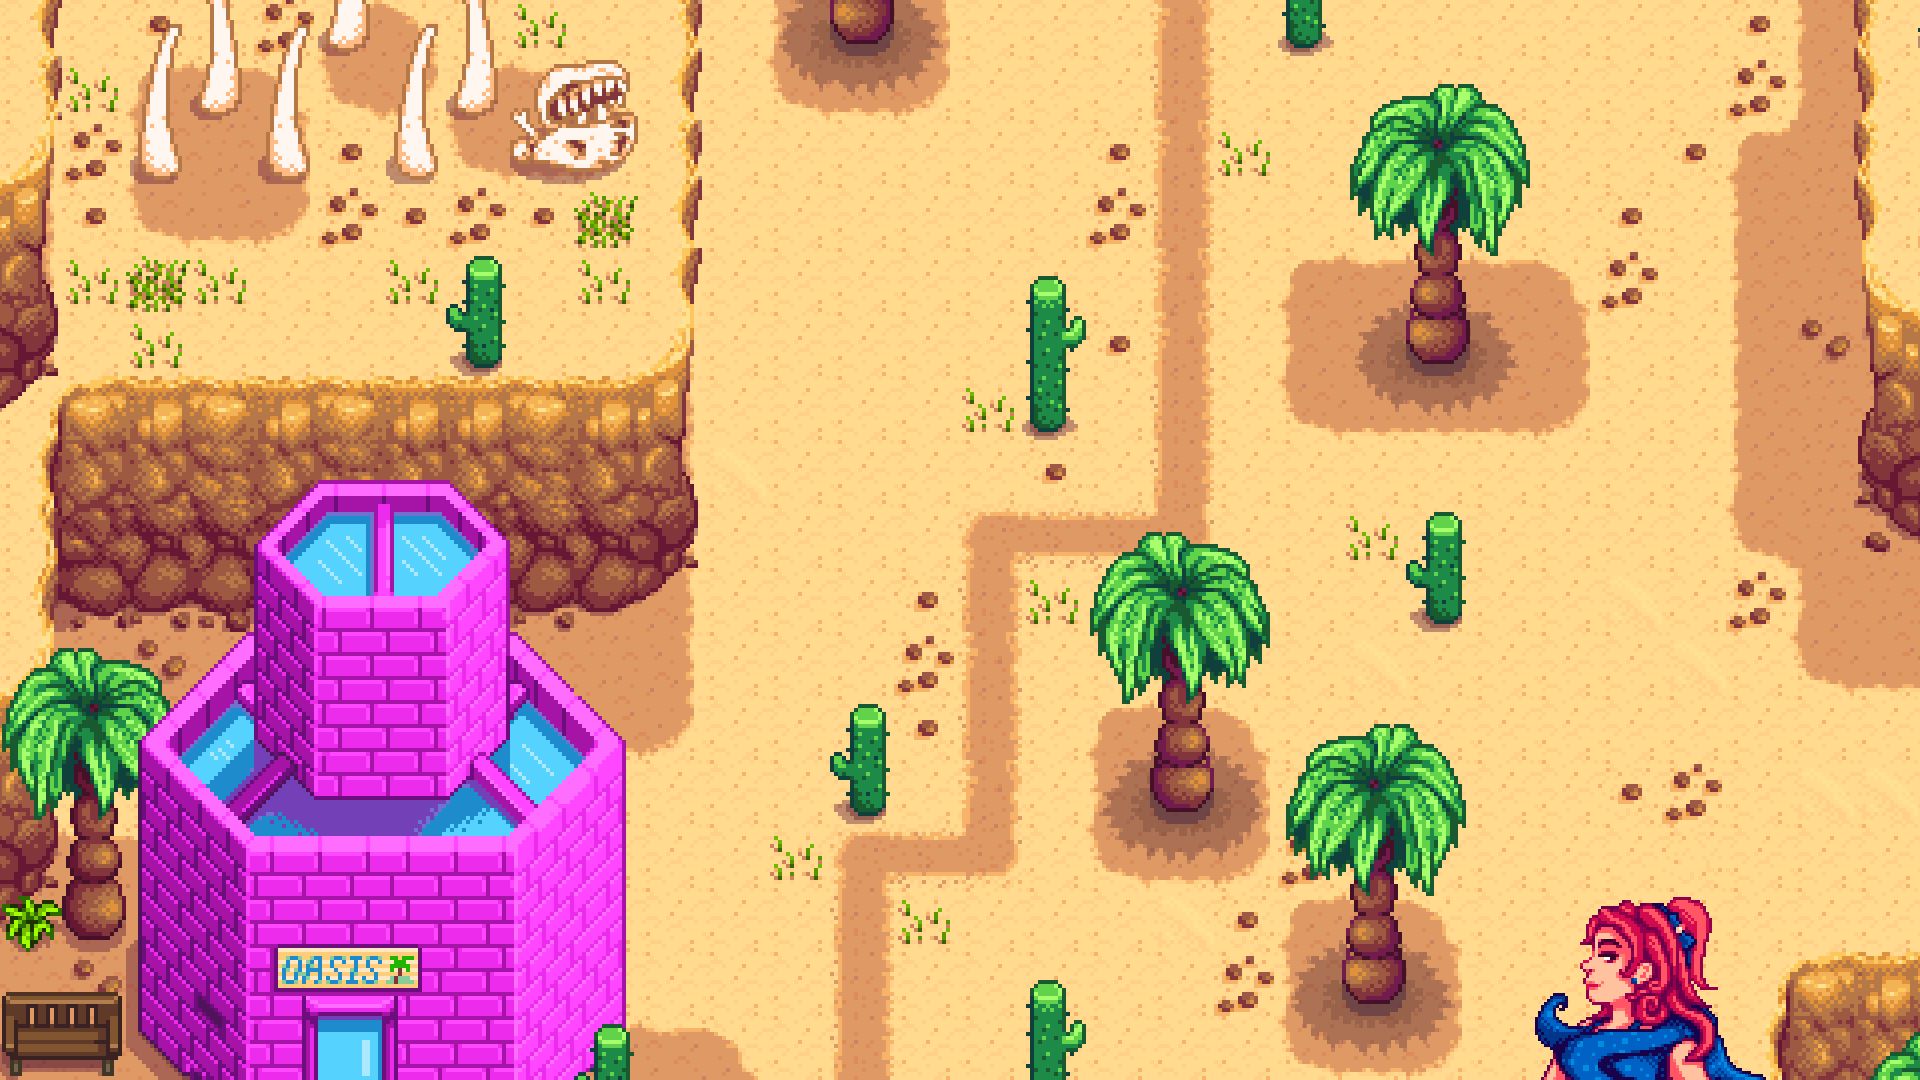 A desert with a pink tower full of water labeled Oasis